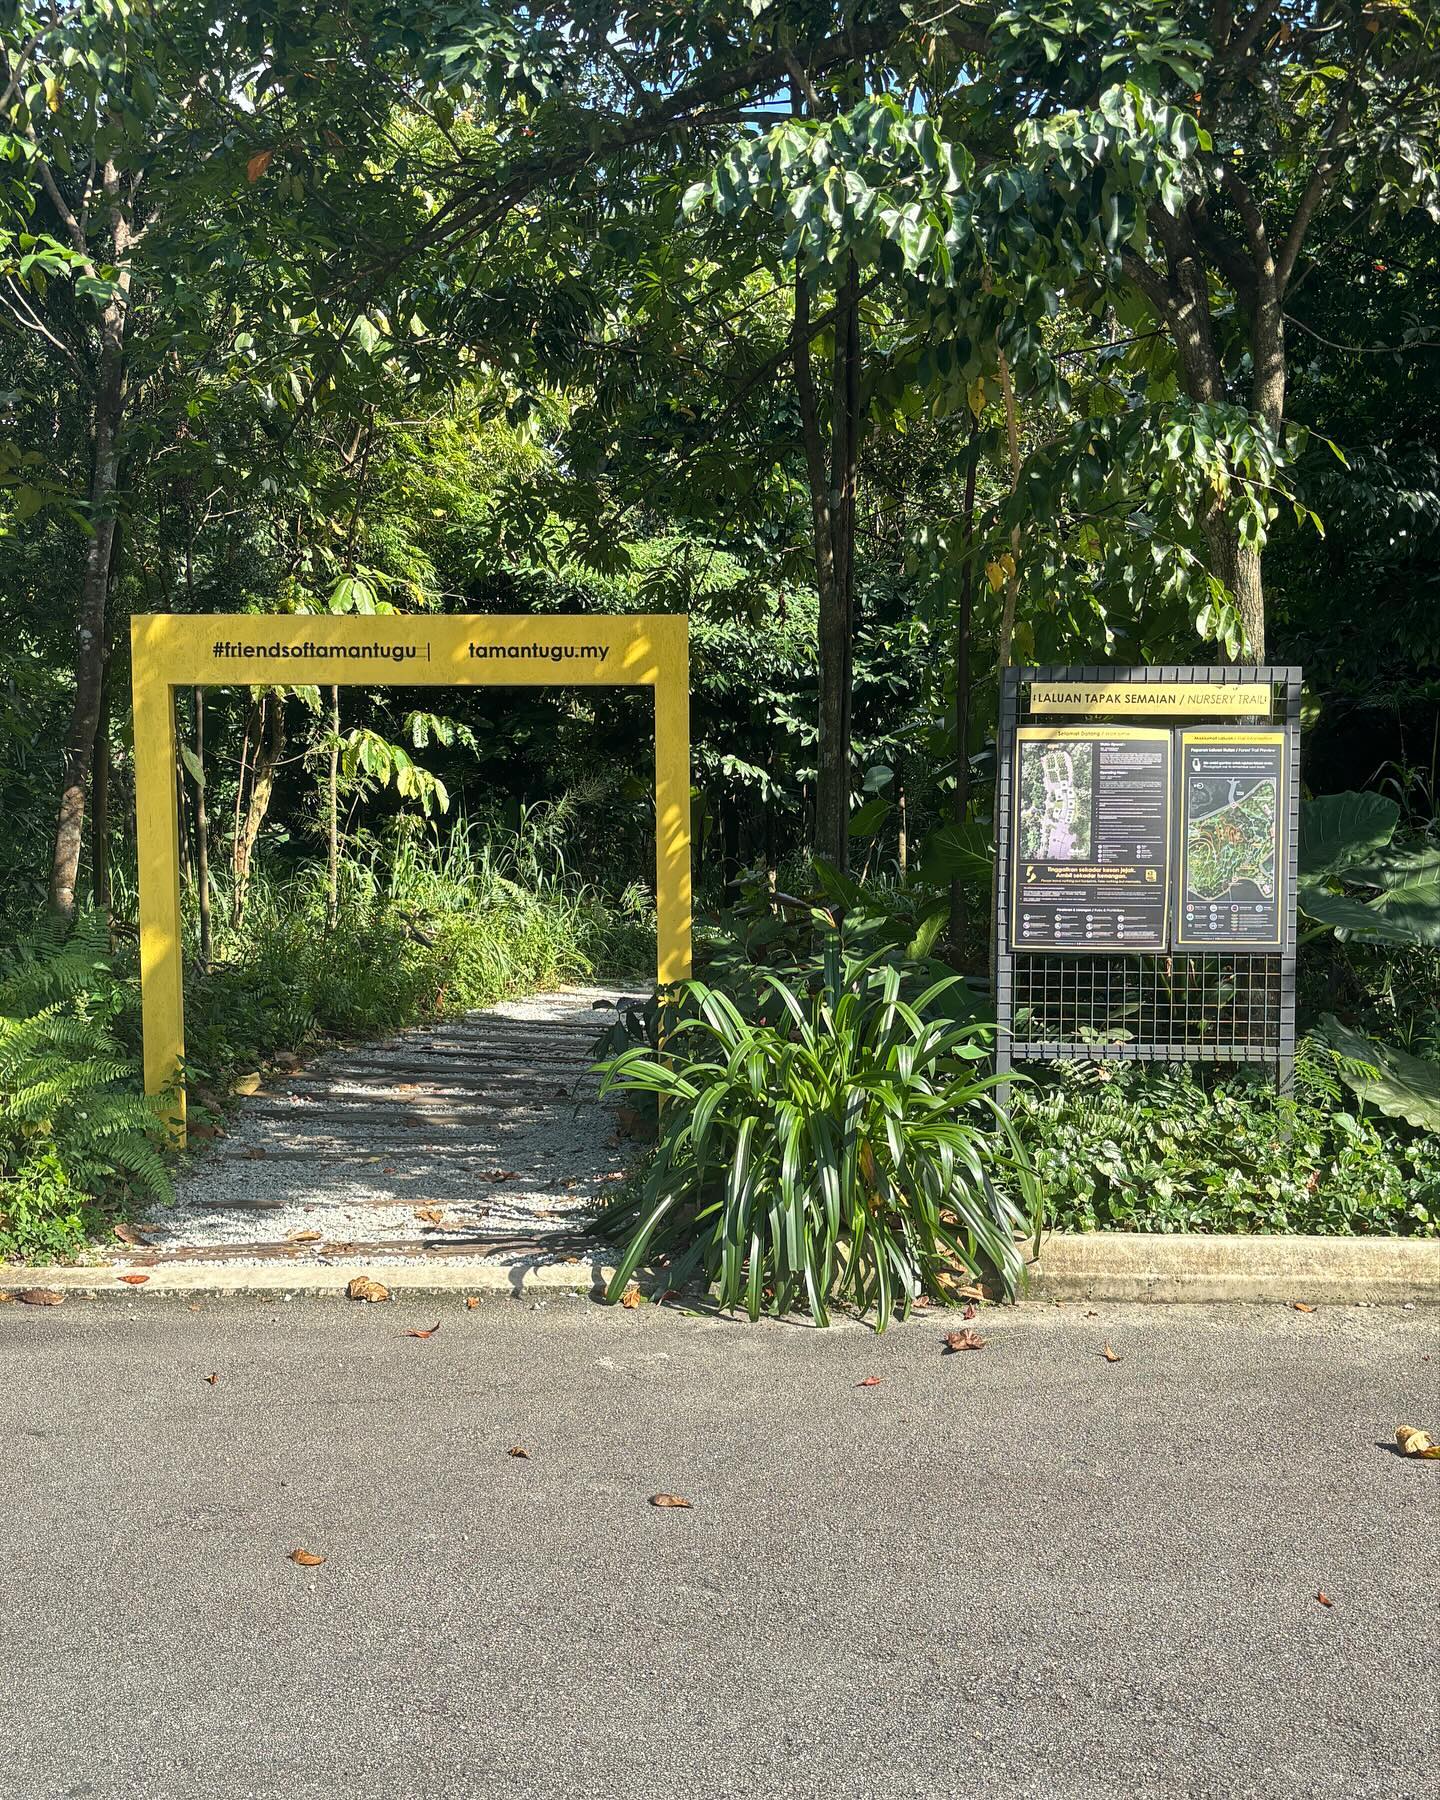 Taman Tugu Hike Trails: Embark on an outdoor adventure through Taman Tugu Hike Trails, exploring pristine natural landscapes and discovering hidden gems along the way. This nature escape offers a refreshing contrast to the urban environment, perfect for those seeking a touch of wilderness.
#hiking #treeking #tamantuguforesttrail #kualalumpur #malaysia